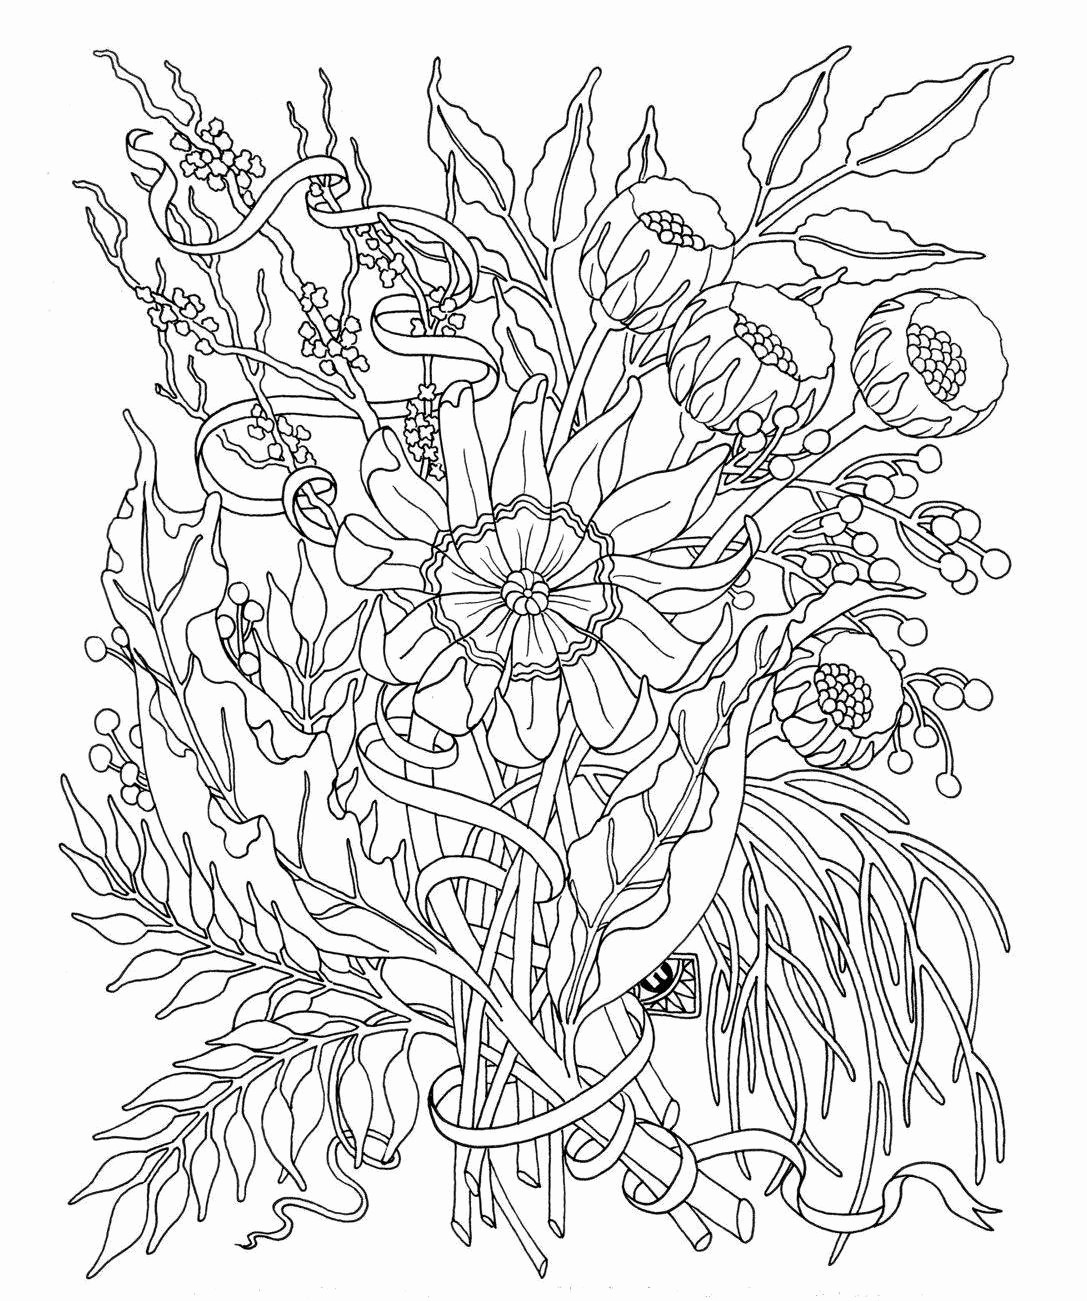 29 Famous Black and White Flower Vase 2024 free download black and white flower vase of clone wars coloring pages luxury cool vases flower vase coloring intended for clone wars coloring pages luxury cool vases flower vase coloring page pages flowe